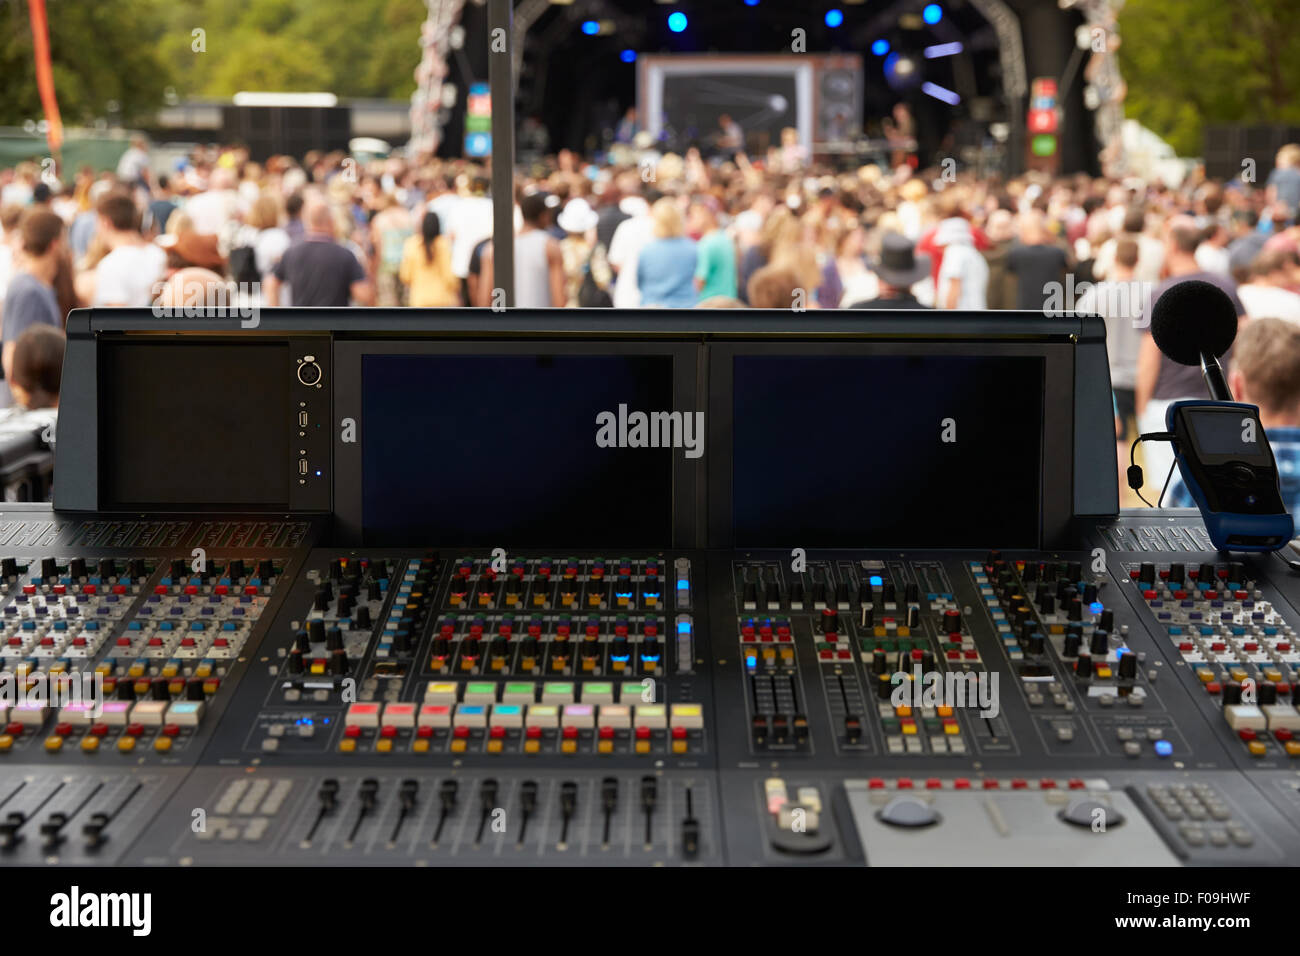 Sound and lighting desk at an outdoor festival concert Stock Photo